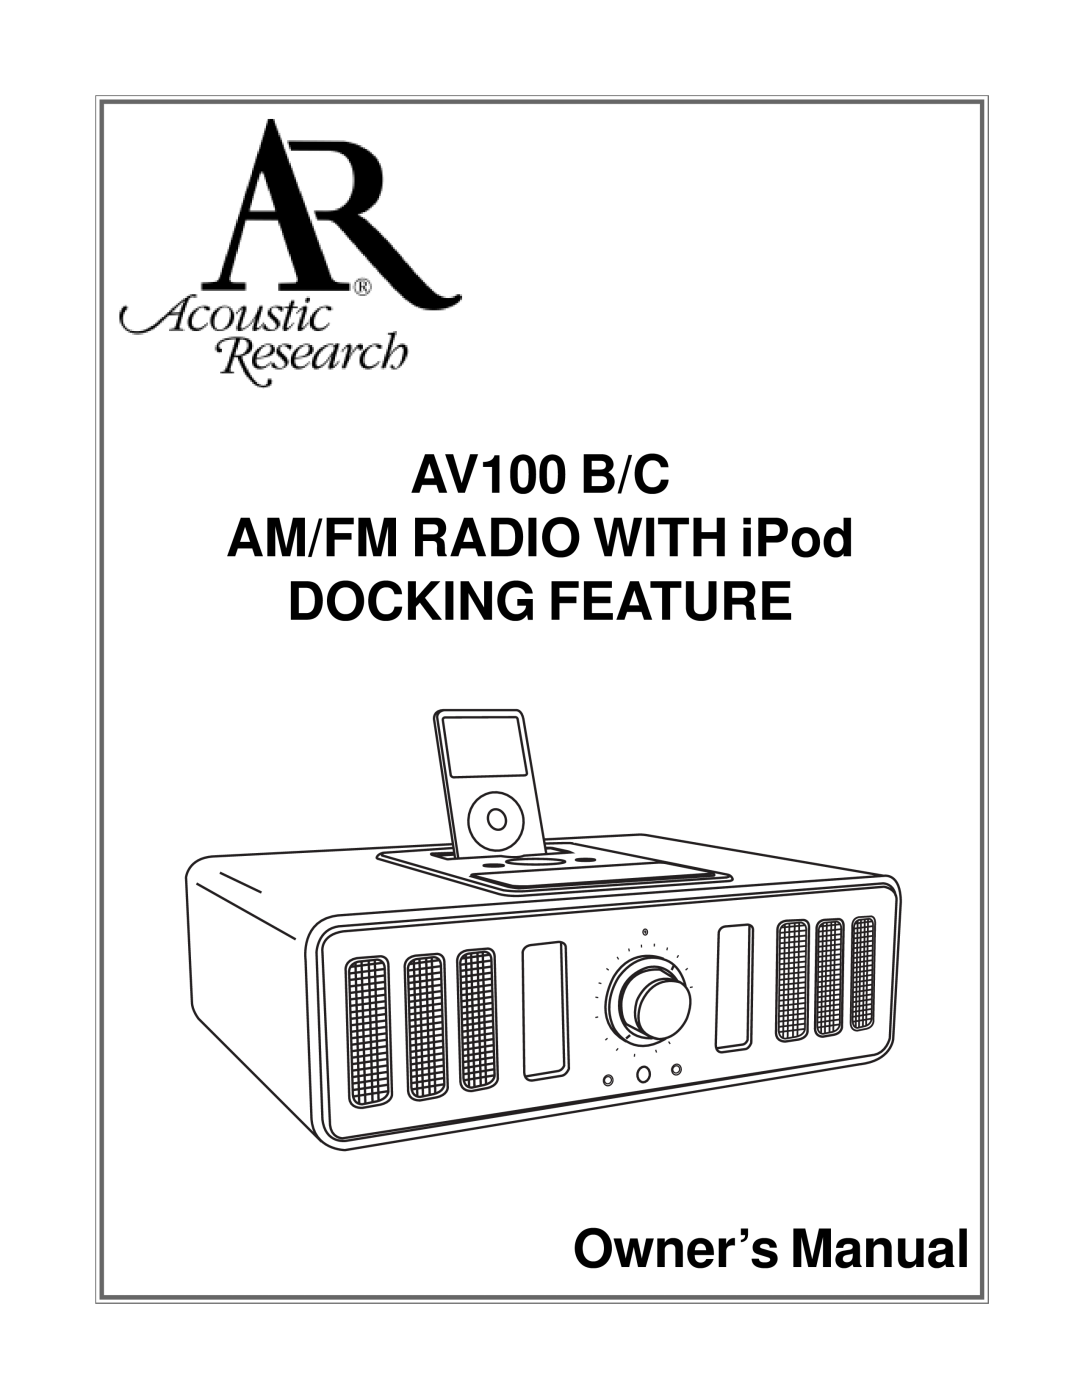 Acoustic Research AV100 C owner manual AM/FM RADIO WITH iPod, Owner’s Manual, AV100 B/C, Docking Feature 